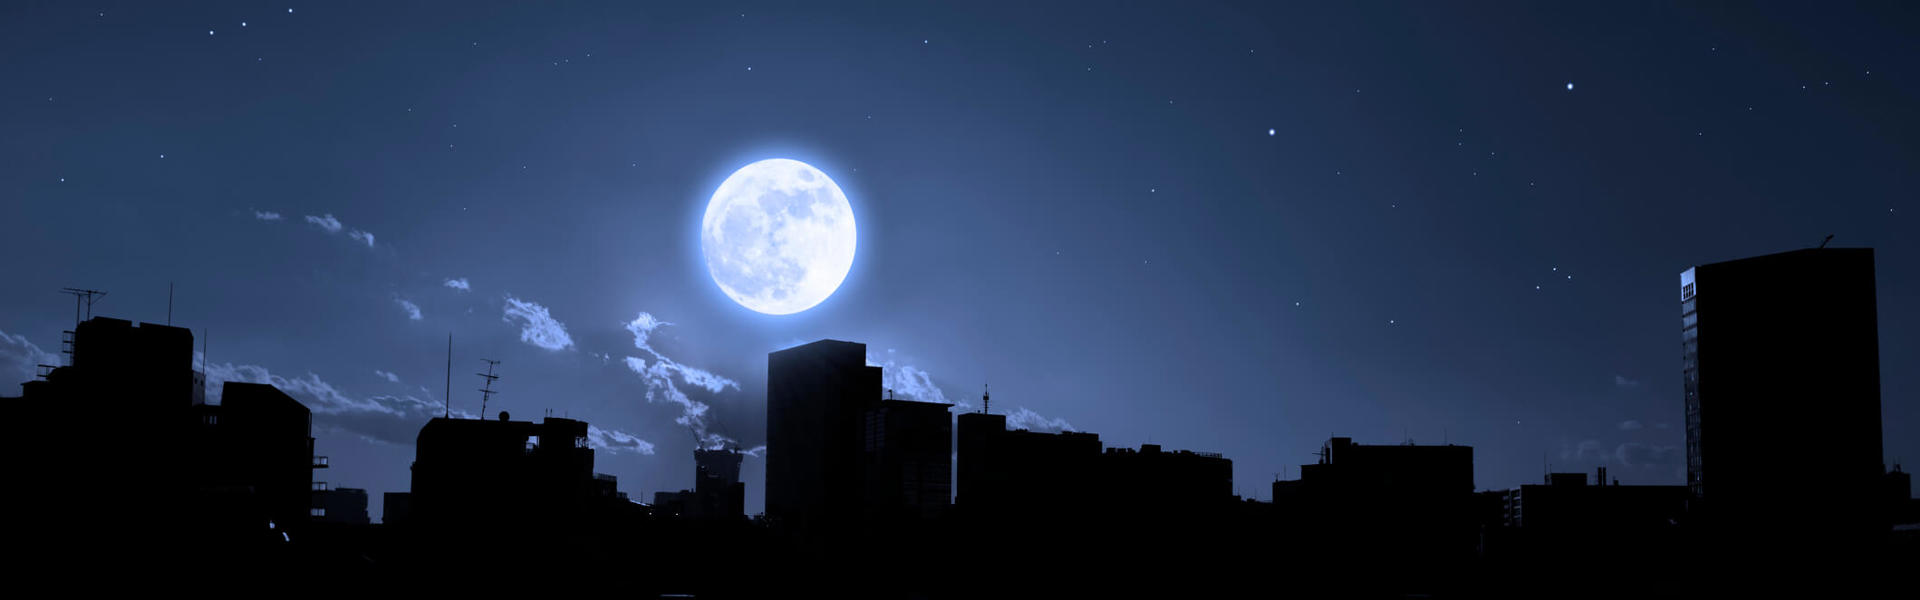 a full moon at night over a city skyline